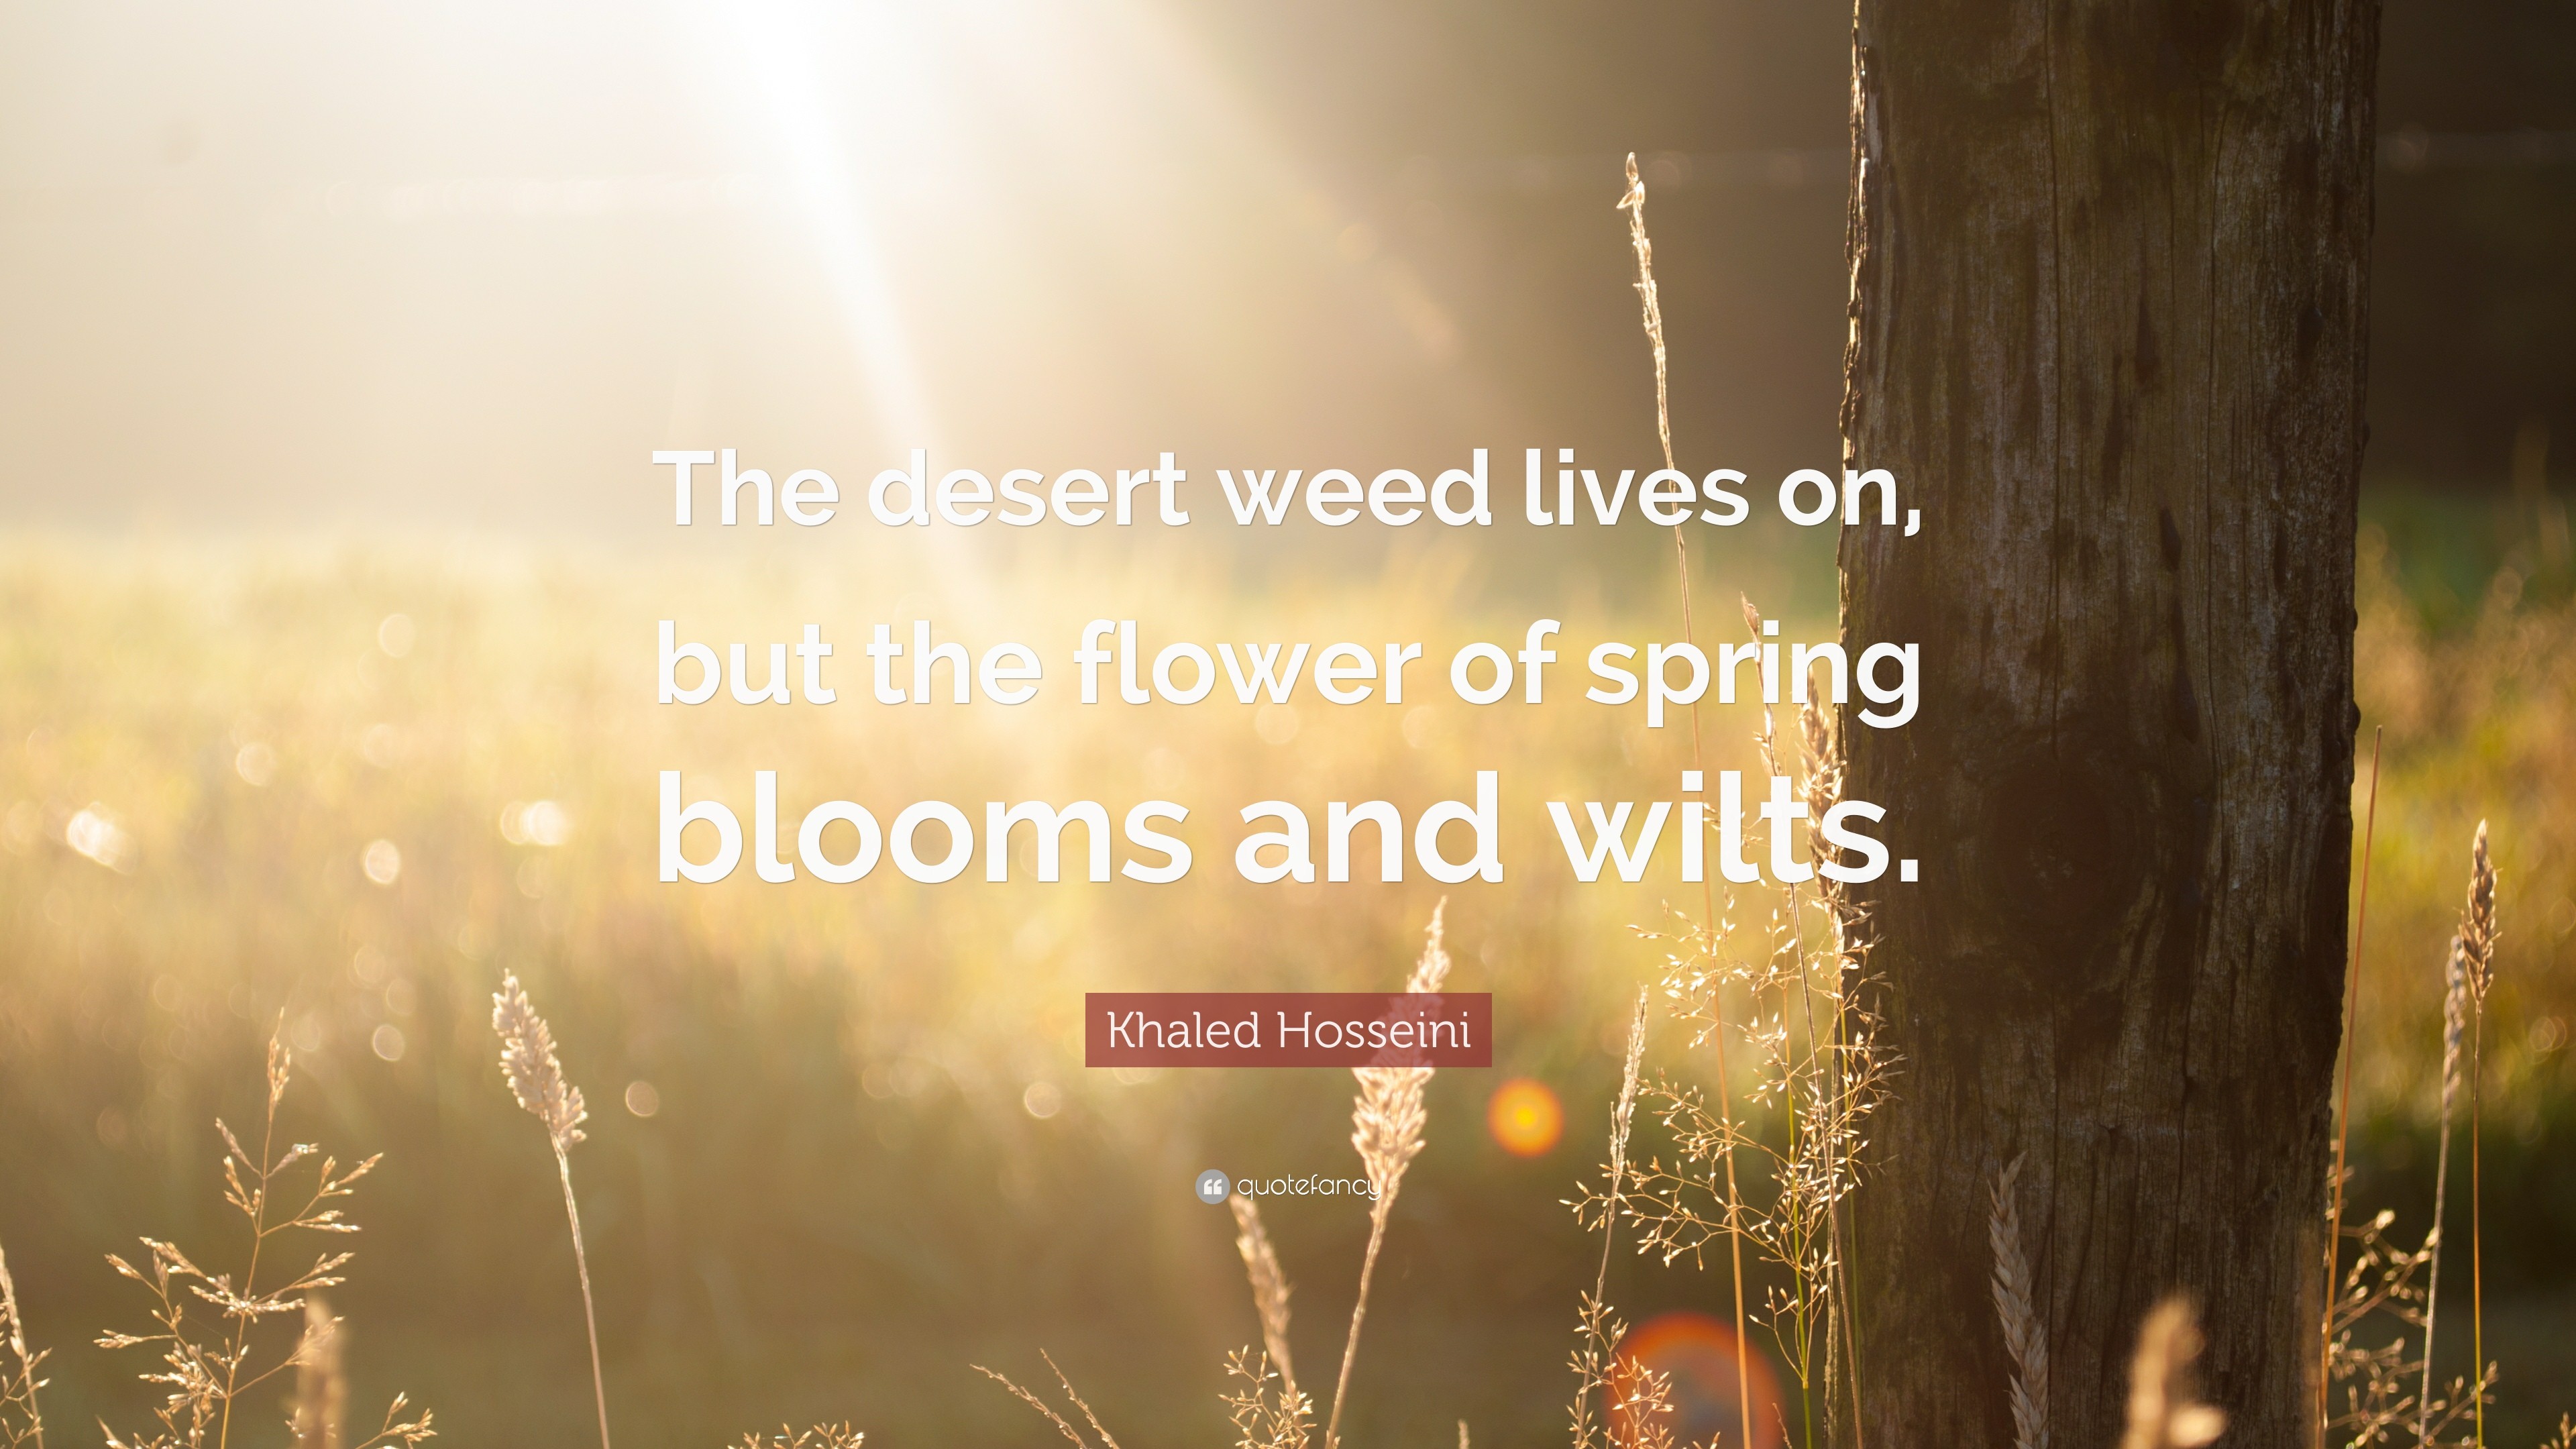 3840x2160 Khaled Hosseini Quote: “The desert weed lives on, but the flower of spring